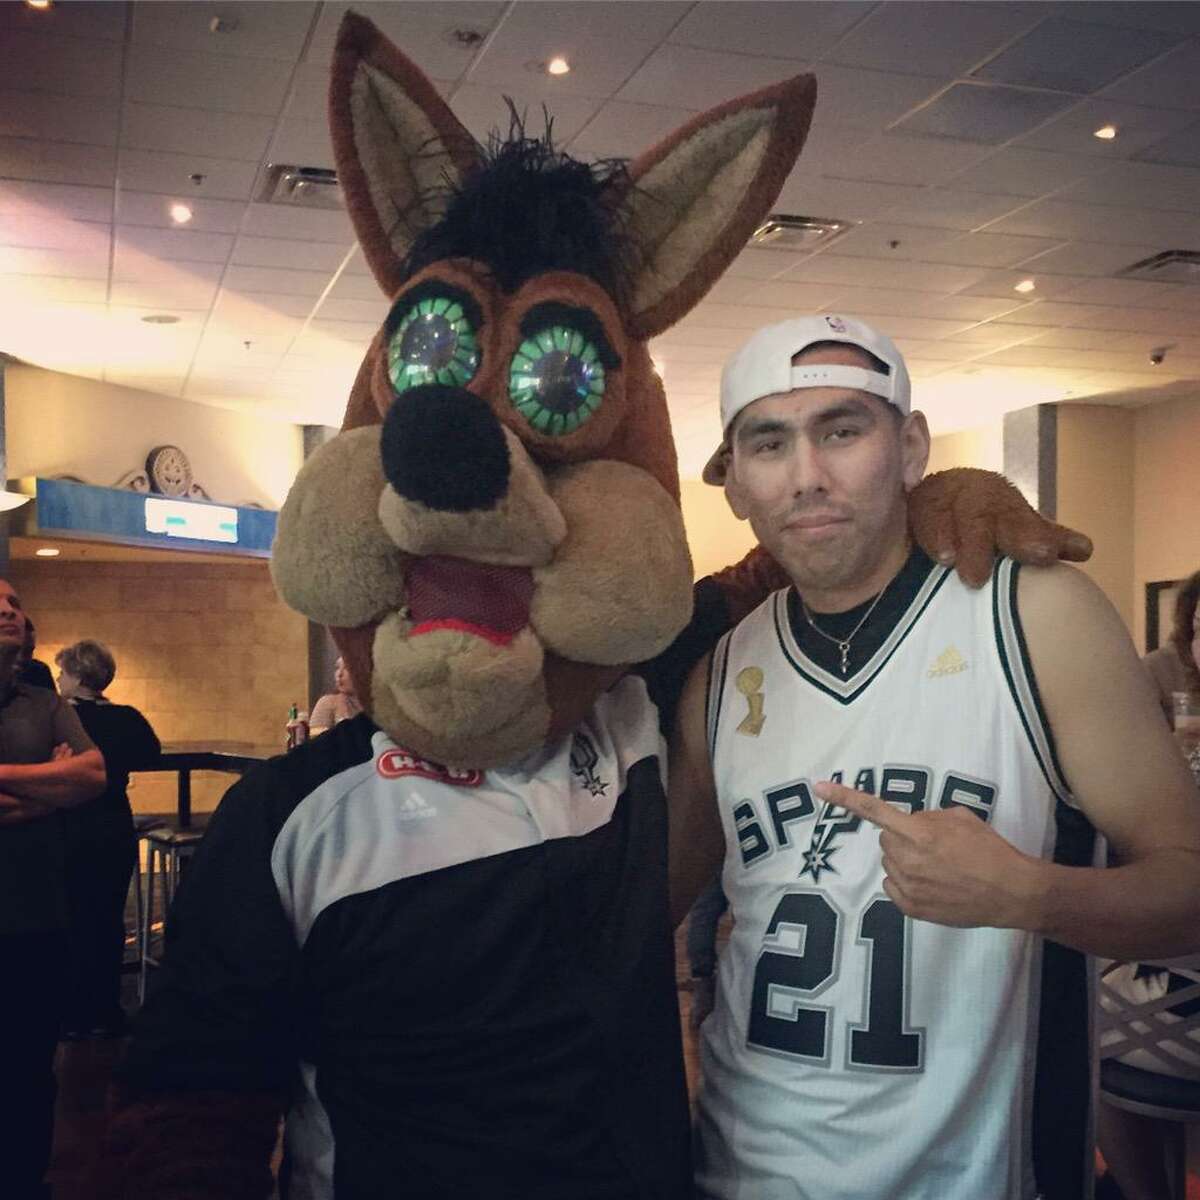 Estrada, told mySA.com No. 2! made an appearance at the Rookie Tip-Off event held by the Spurs organization at the Palladium for new season ticket holders like himself.